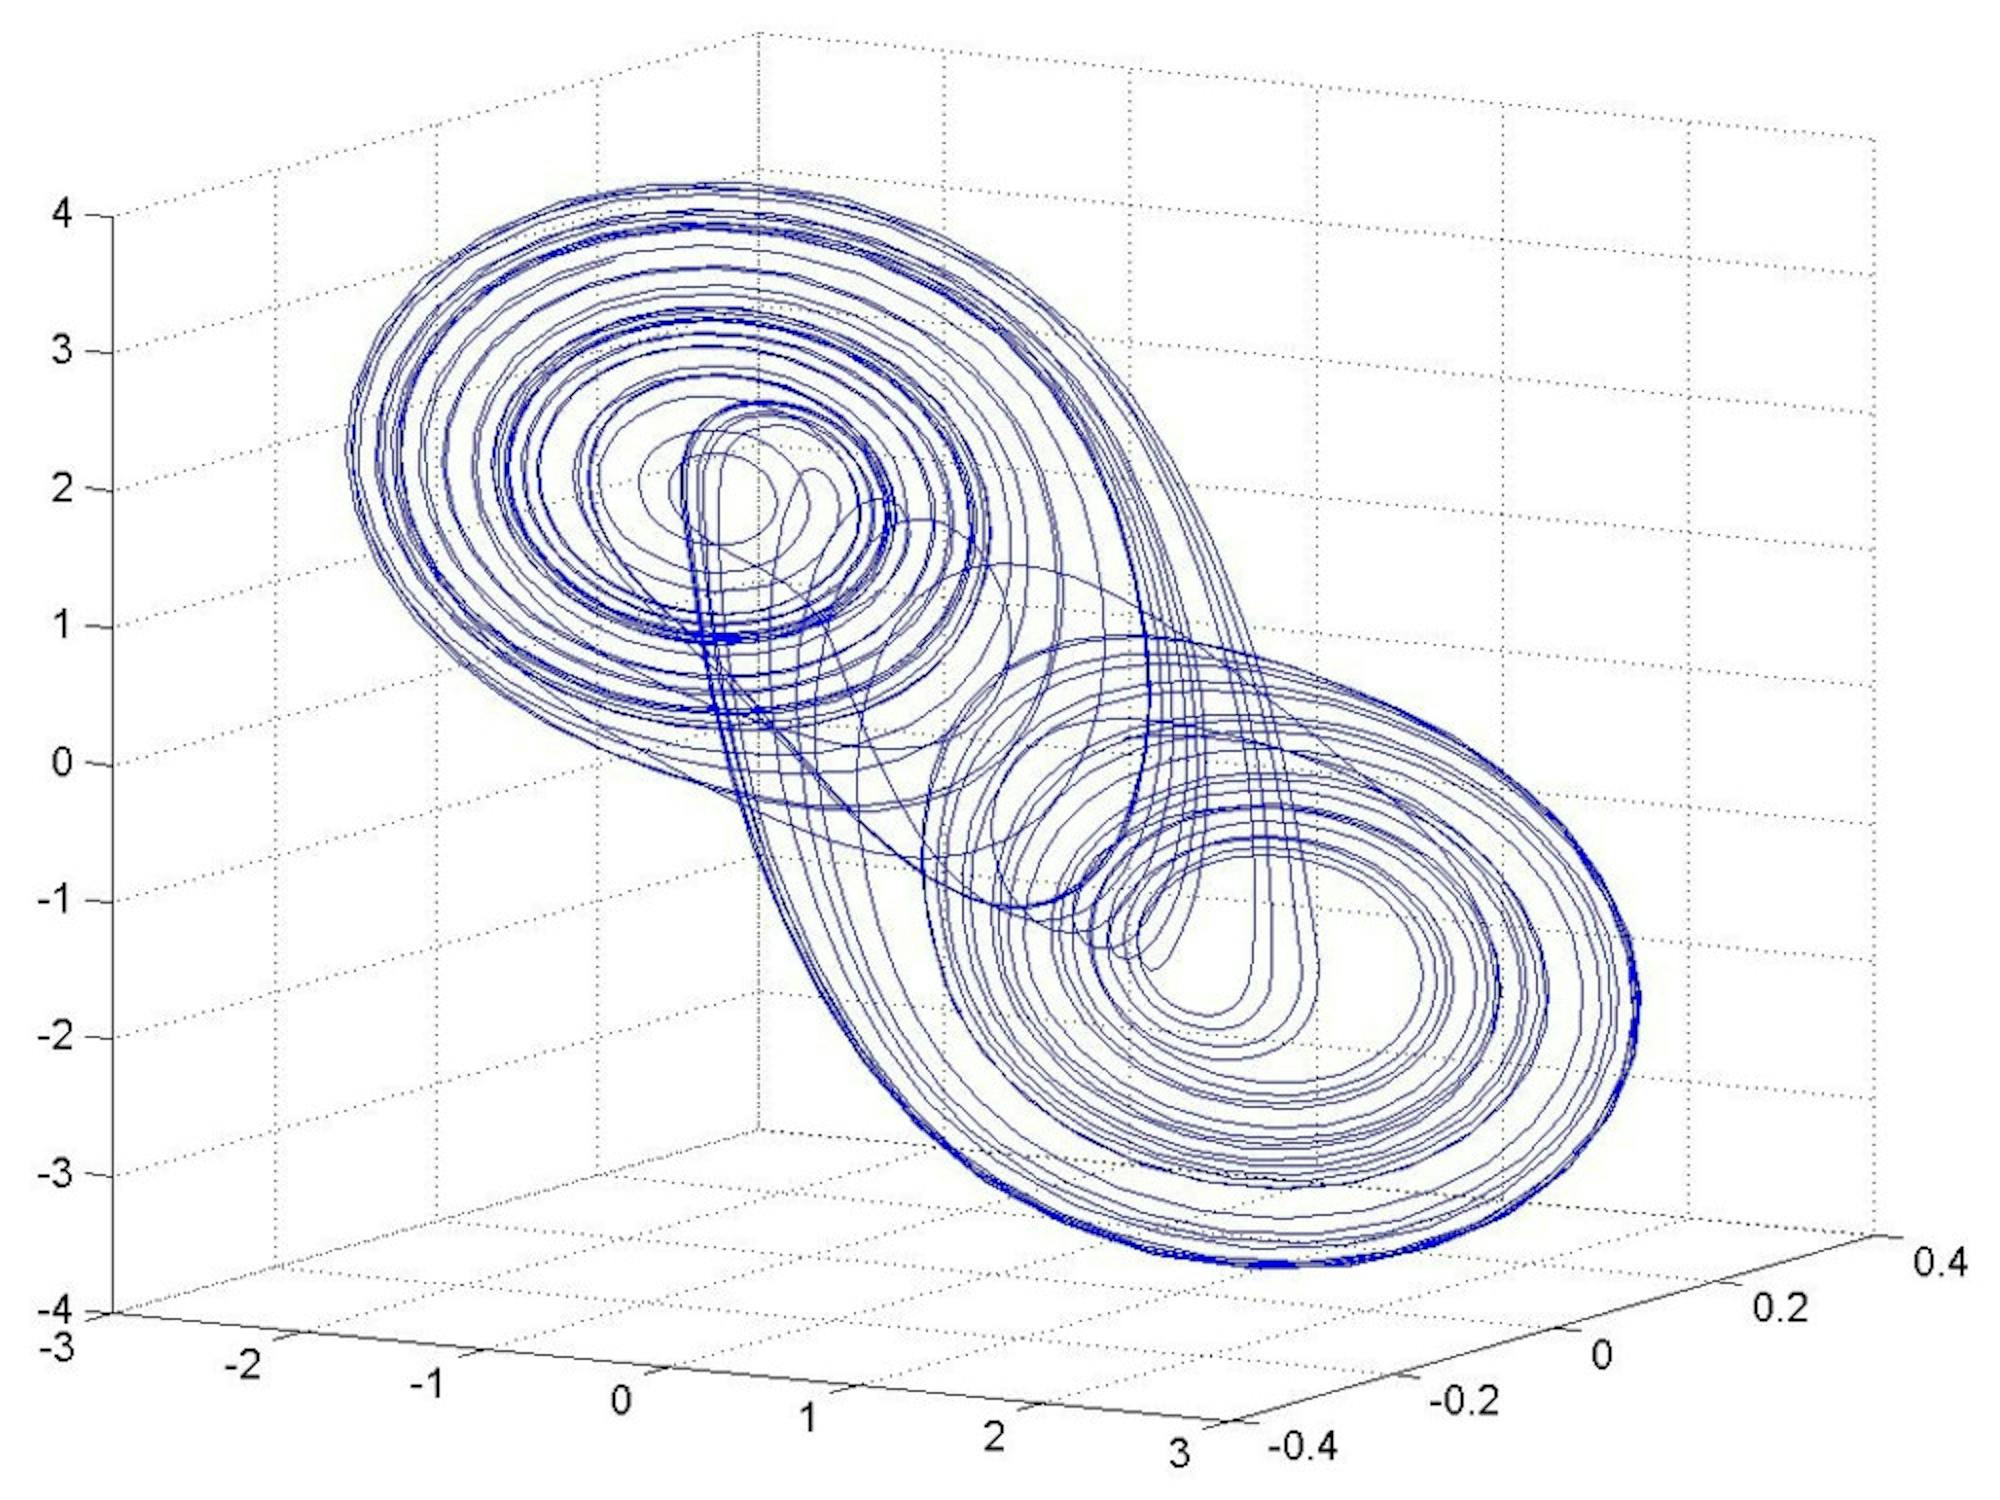 Double_scroll_attractor_from_Matlab_simulation